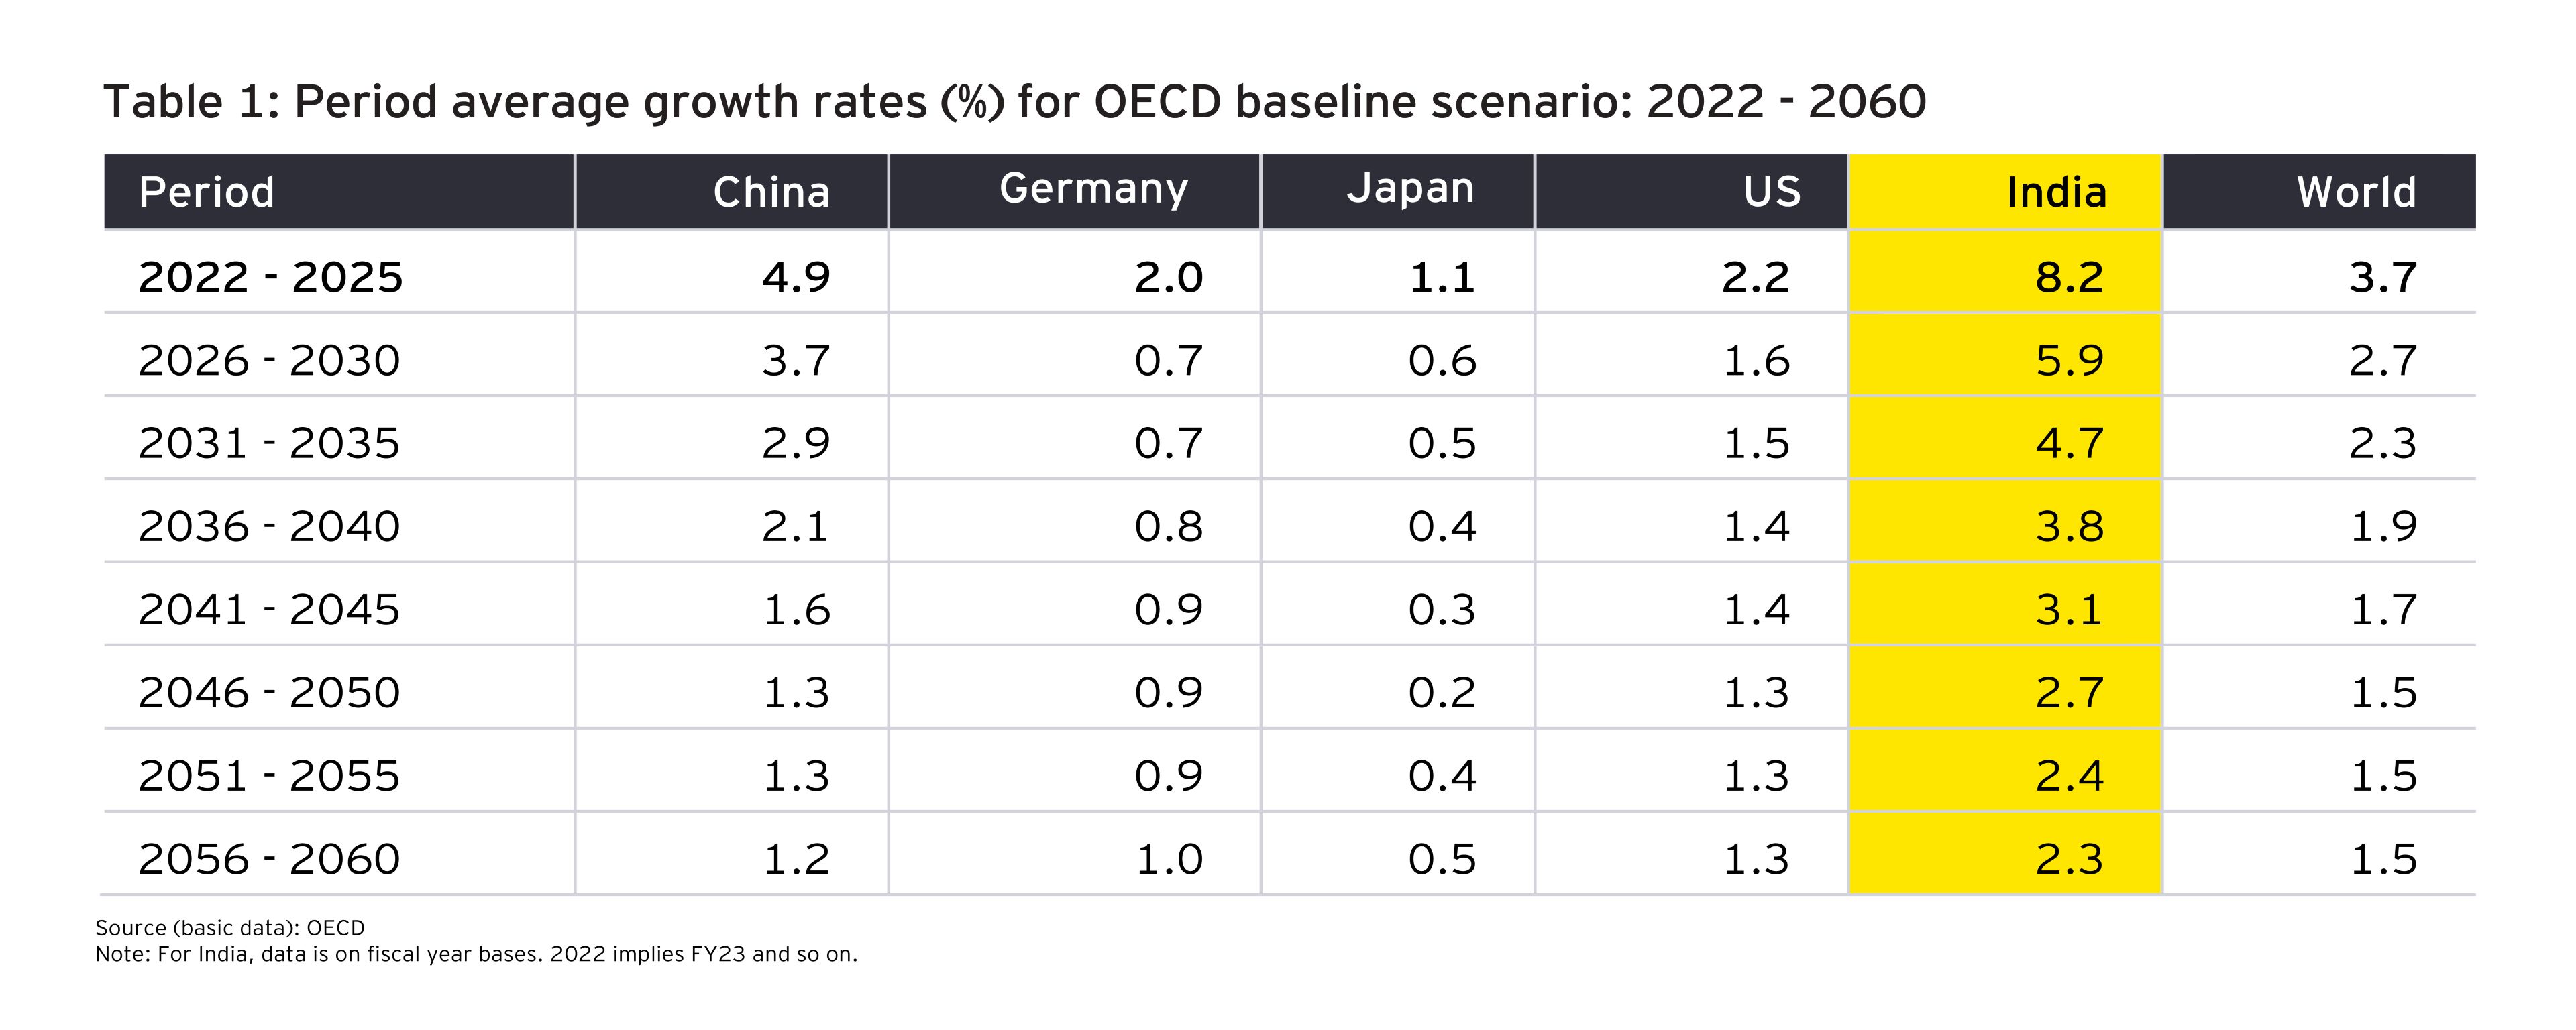 Period average growth rates (%) for OECD baseline scenario: 2022 to 2060